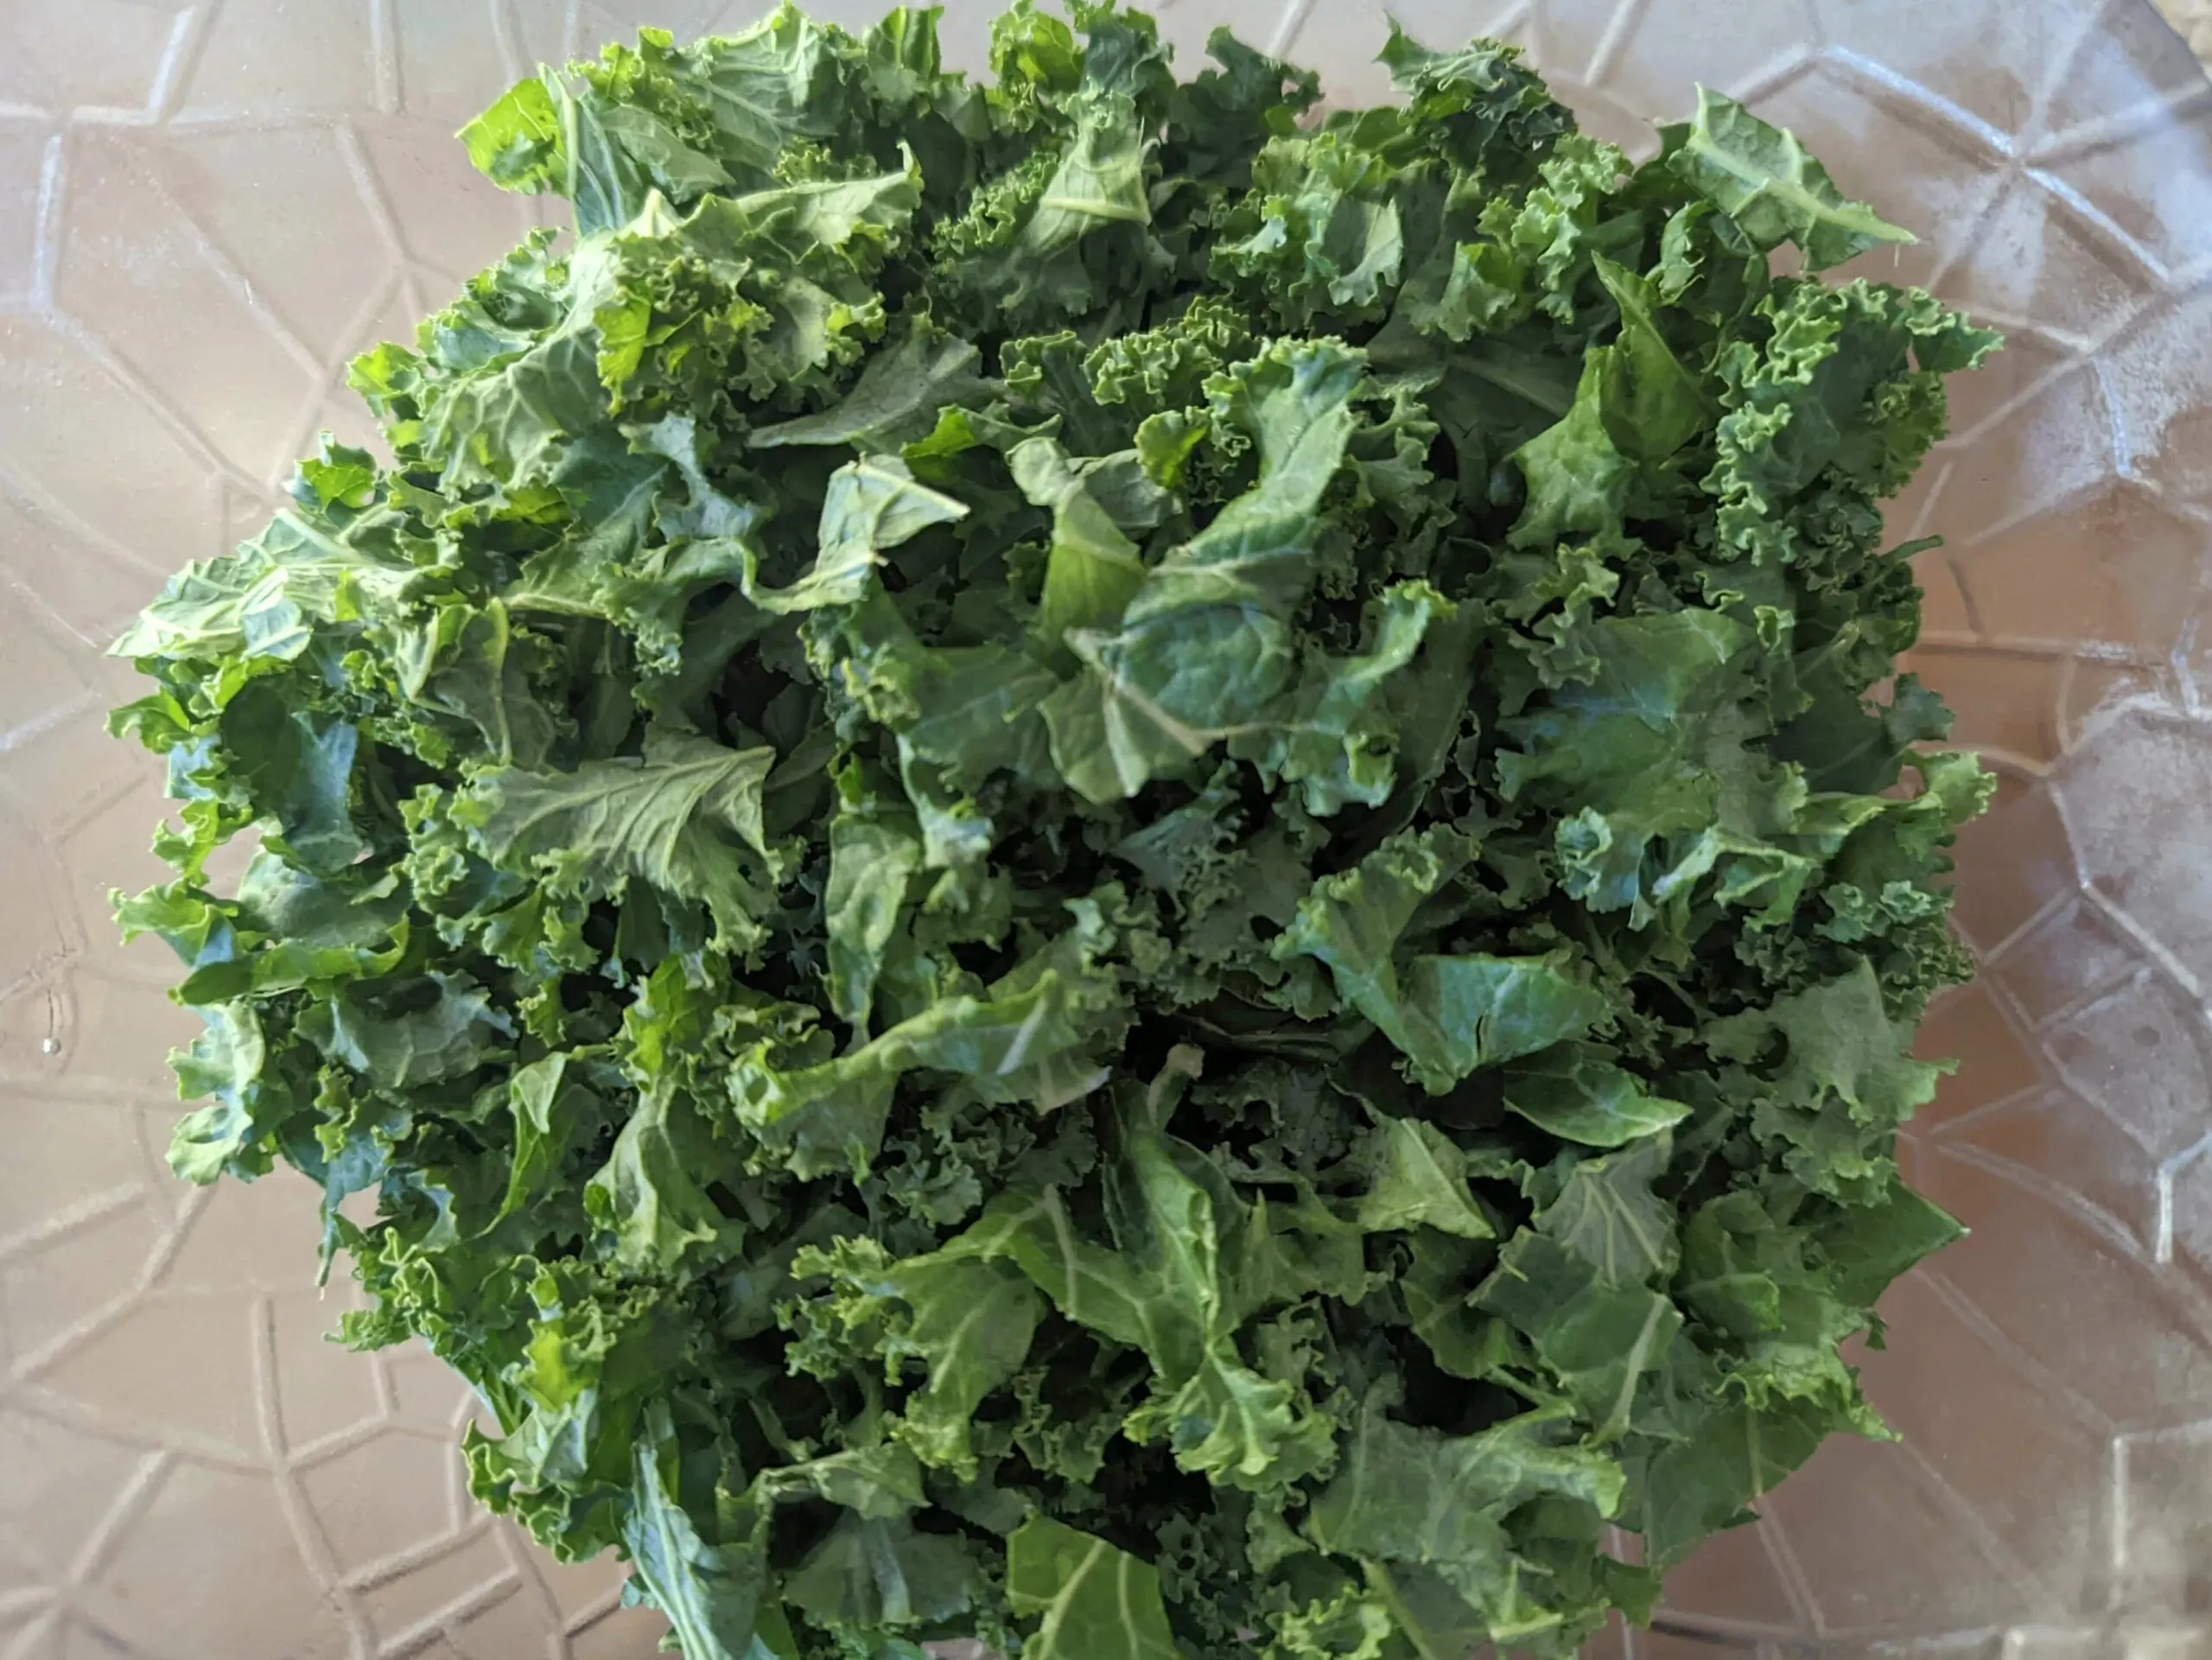 Kale on a plate to create the base for the salad.